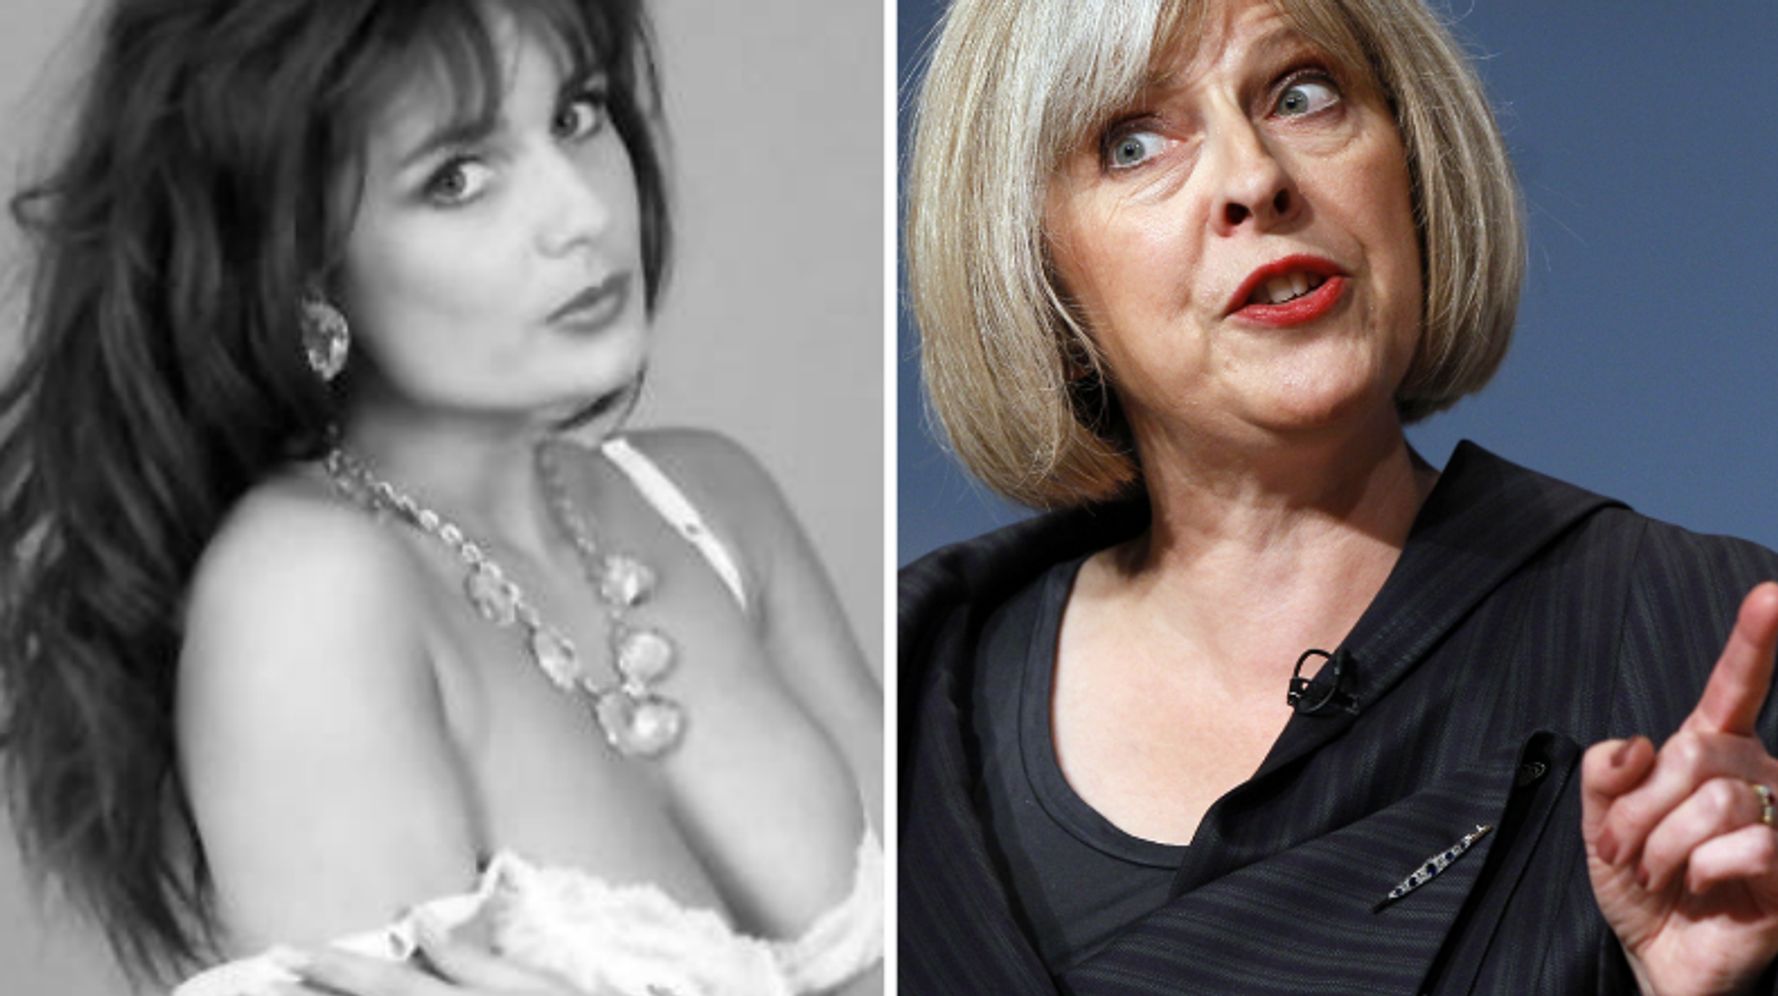 Phimxse - Soft Porn Model Teresa May Forced To Deny She Will Be Prime Minister And  Tory Leader | HuffPost UK News